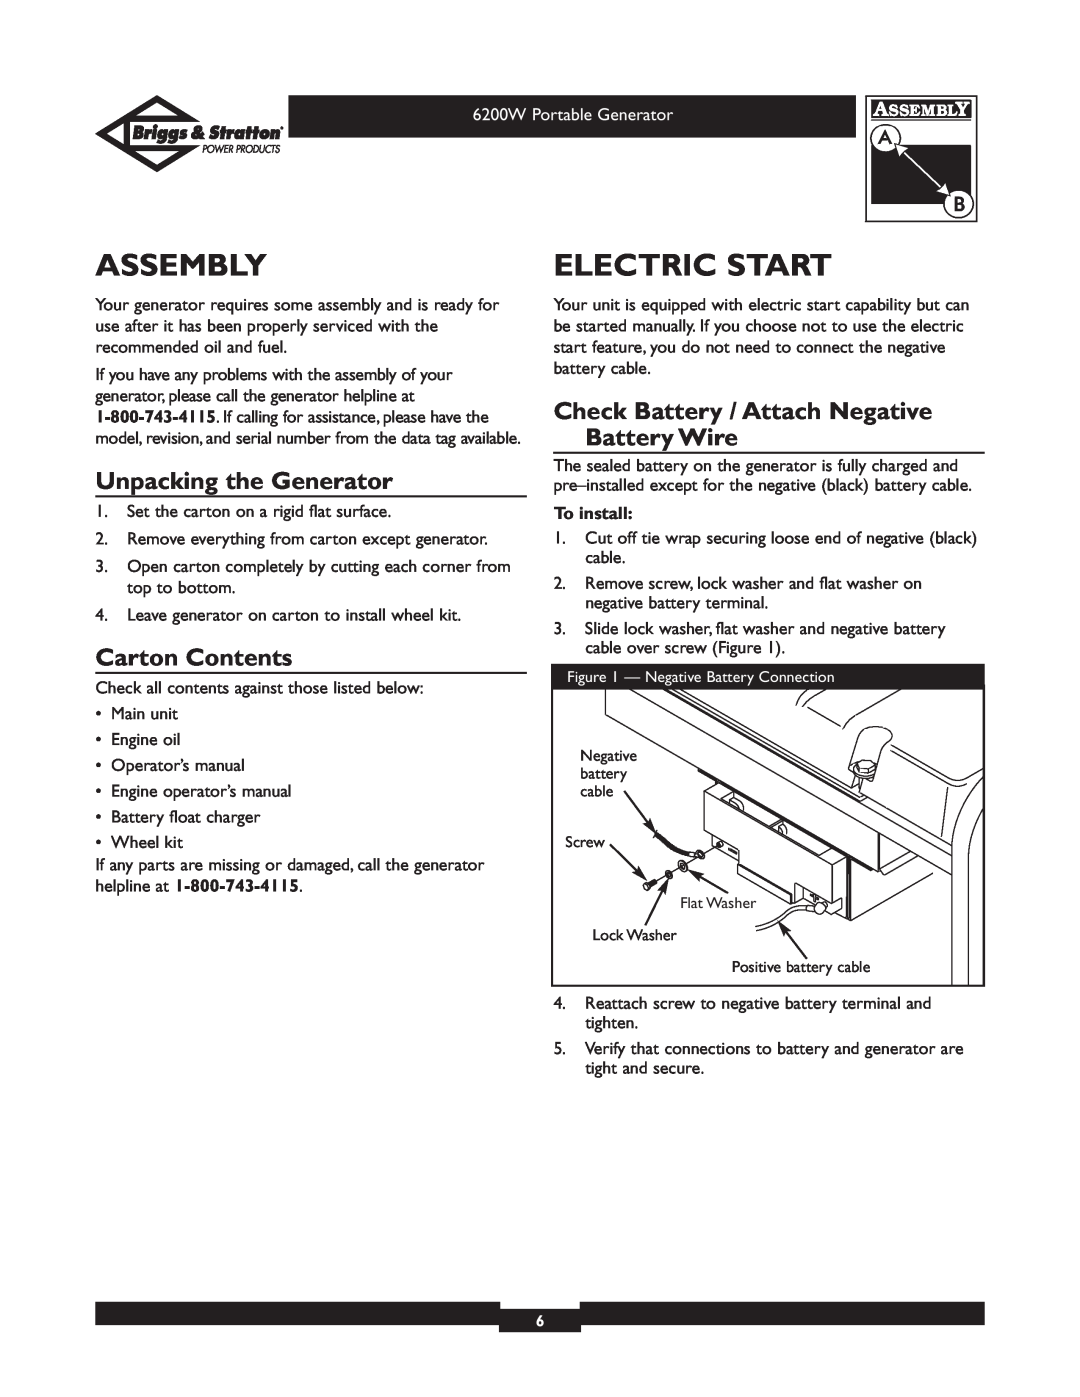 Briggs & Stratton 30211 Assembly, Electric Start, Unpacking the Generator, Carton Contents, 6200W Portable Generator 